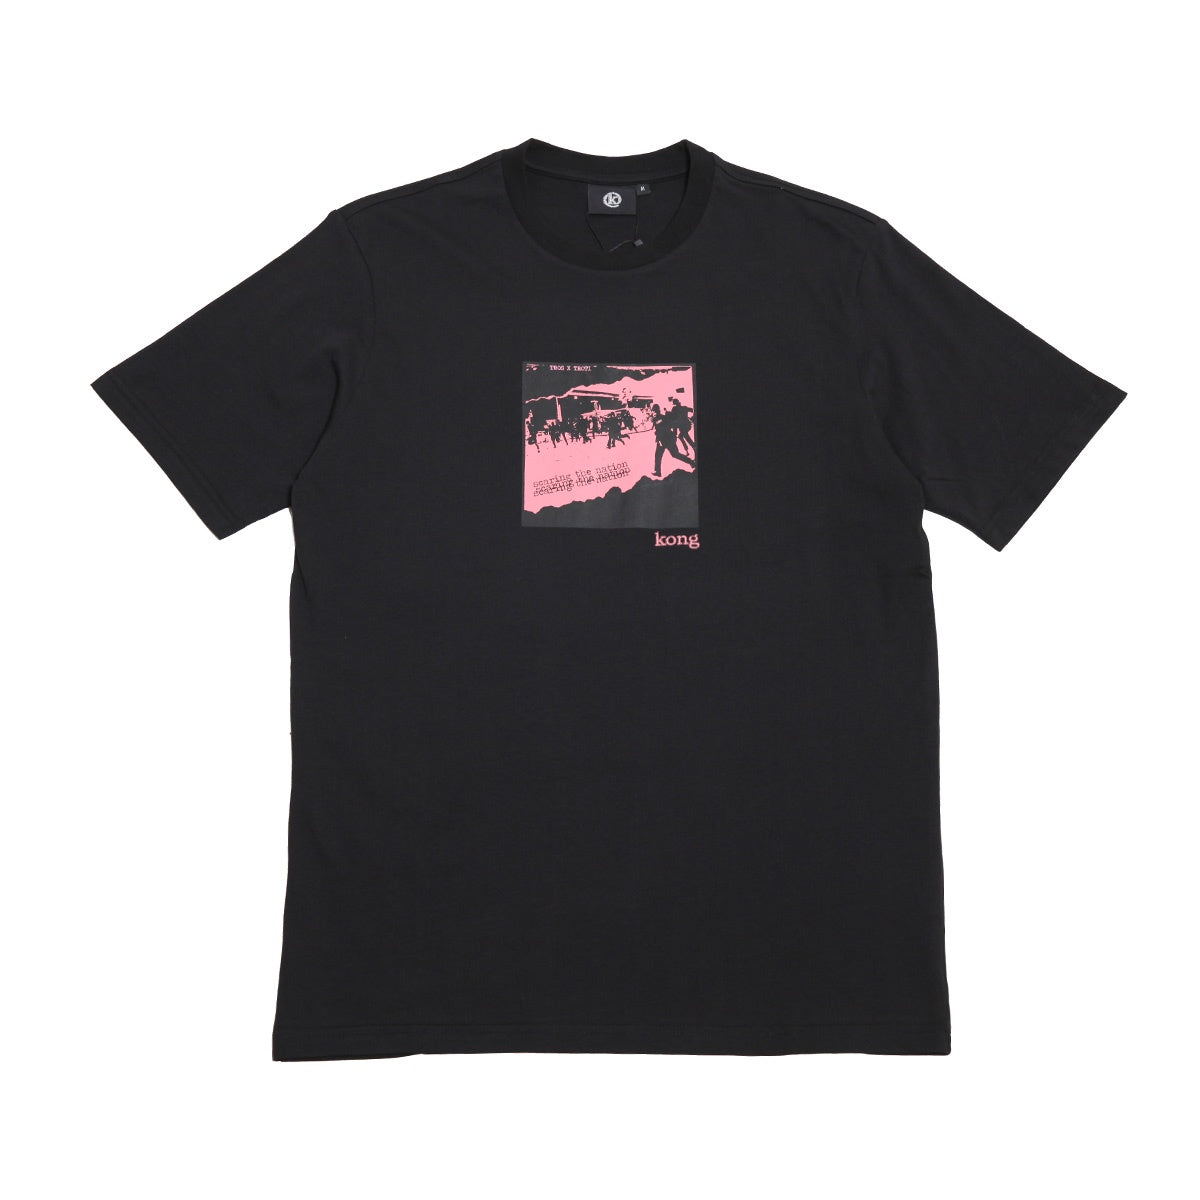 Kong Scaring The Nation Tee Black